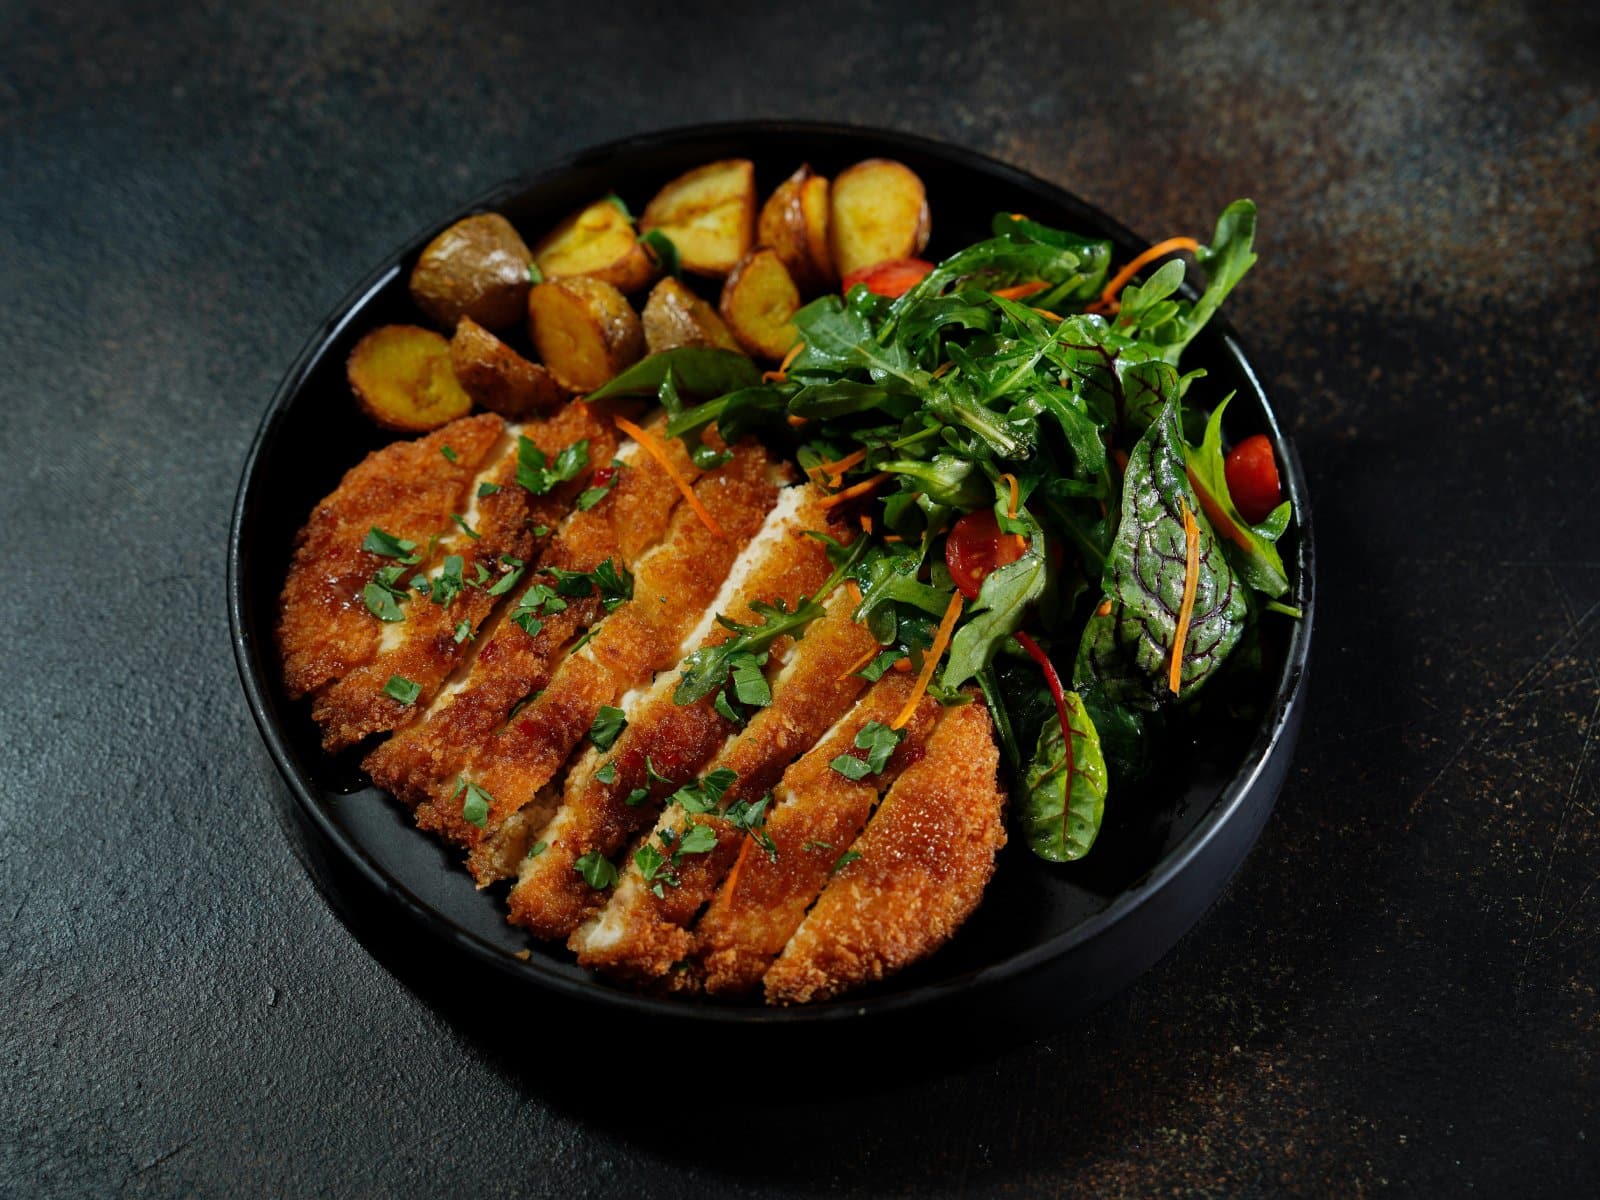 <p class="wp-caption-text">Image Credit: Pexels / Nadin Sh</p>  <p><span>Wiener Schnitzel, a breaded and fried veal cutlet, is Austria’s national dish and a must-try for visitors to Vienna. This simple yet delicious dish is served in many traditional Viennese restaurants, known as “Wirtshäuser,” with Figlmüller being one of the most famous for serving an oversized version that barely fits on the plate. The key to an authentic Wiener Schnitzel lies in its tender meat, crispy coating, and the use of high-quality ingredients.</span></p>